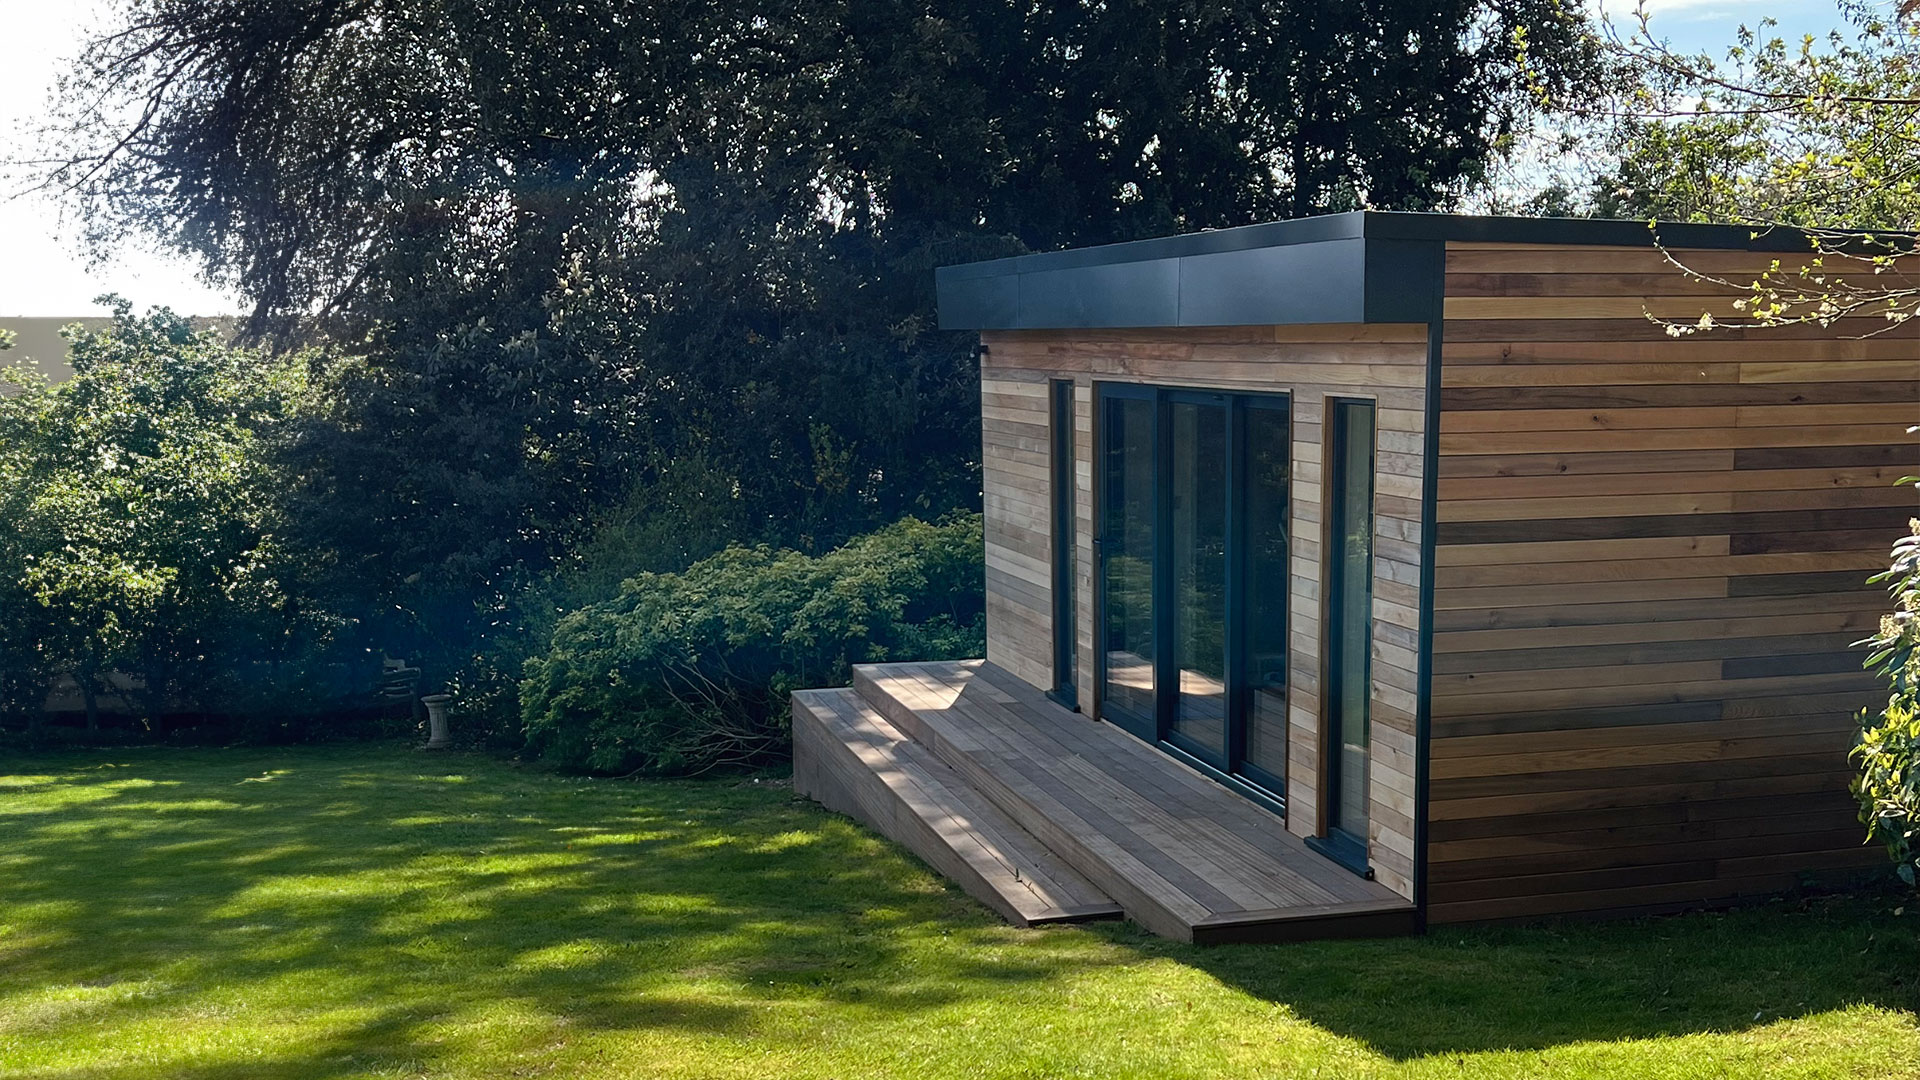 Garden rooms with bathrooms: is the ultimate convenience worth the investment?